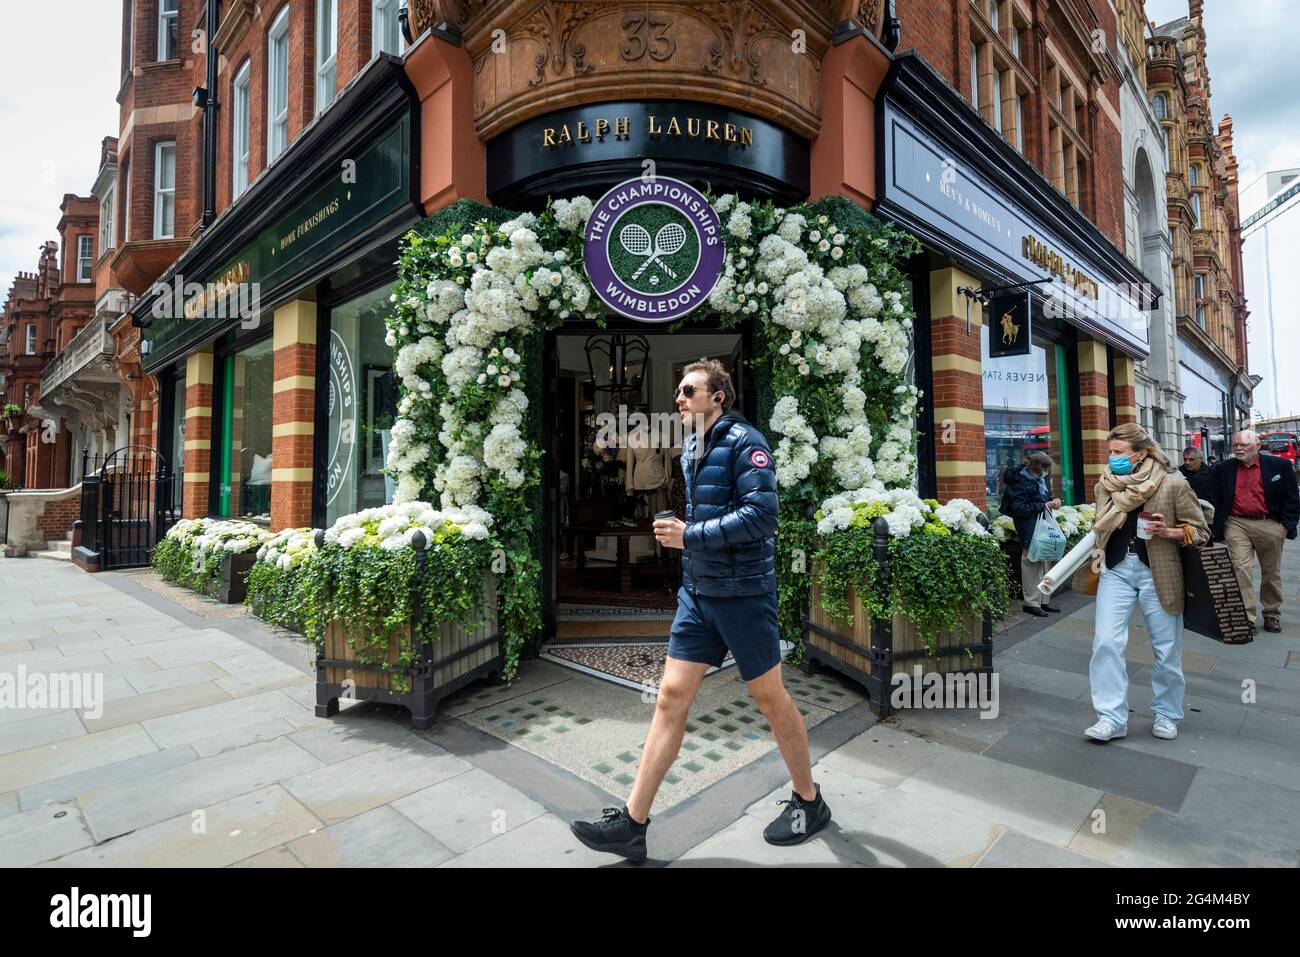 London, UK.  22 June 2021.  People walk past the exterior of the Ralph Lauren store in Sloane Square, decorated ahead of this year’s upcoming Wimbledon tennis championships at the All England club. Ralph Lauren supplies outfits for officials at the event.  Lockdown restrictions will limit crowds, but the finals will be at full capacity when restrictions are relaxed.  Credit: Stephen Chung / Alamy Live News Stock Photo